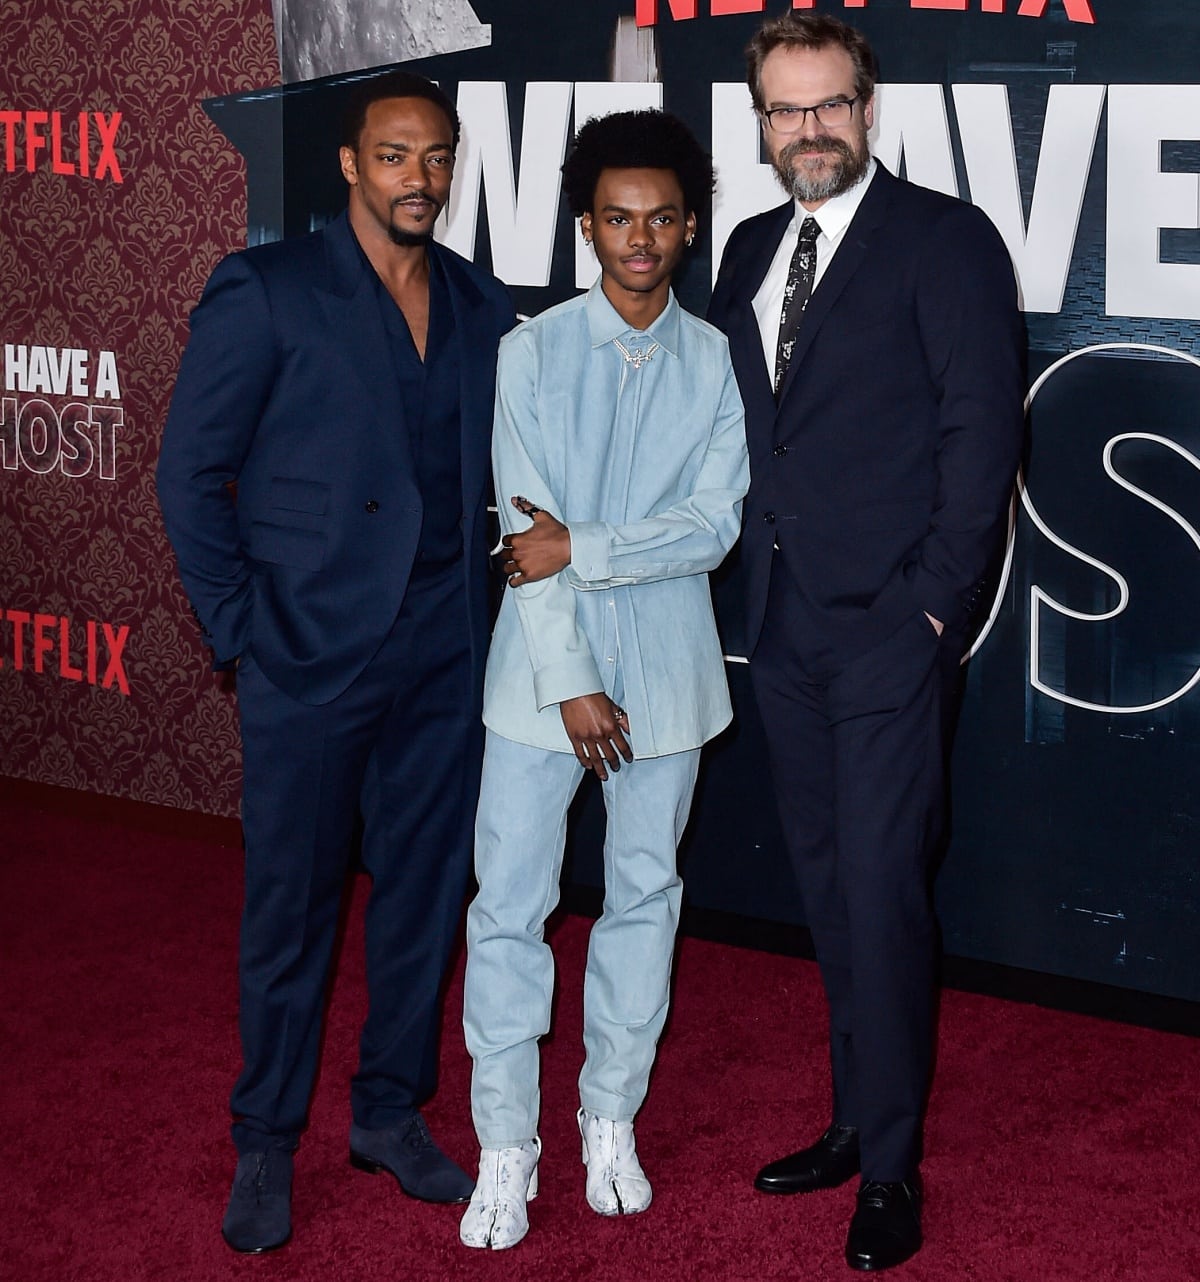 At five feet and ten inches, Anthony Mackie is taller than We Have a Ghost co-star Jahi Di’Allo Winston, but David Harbour towers over both of them at six feet and three inches